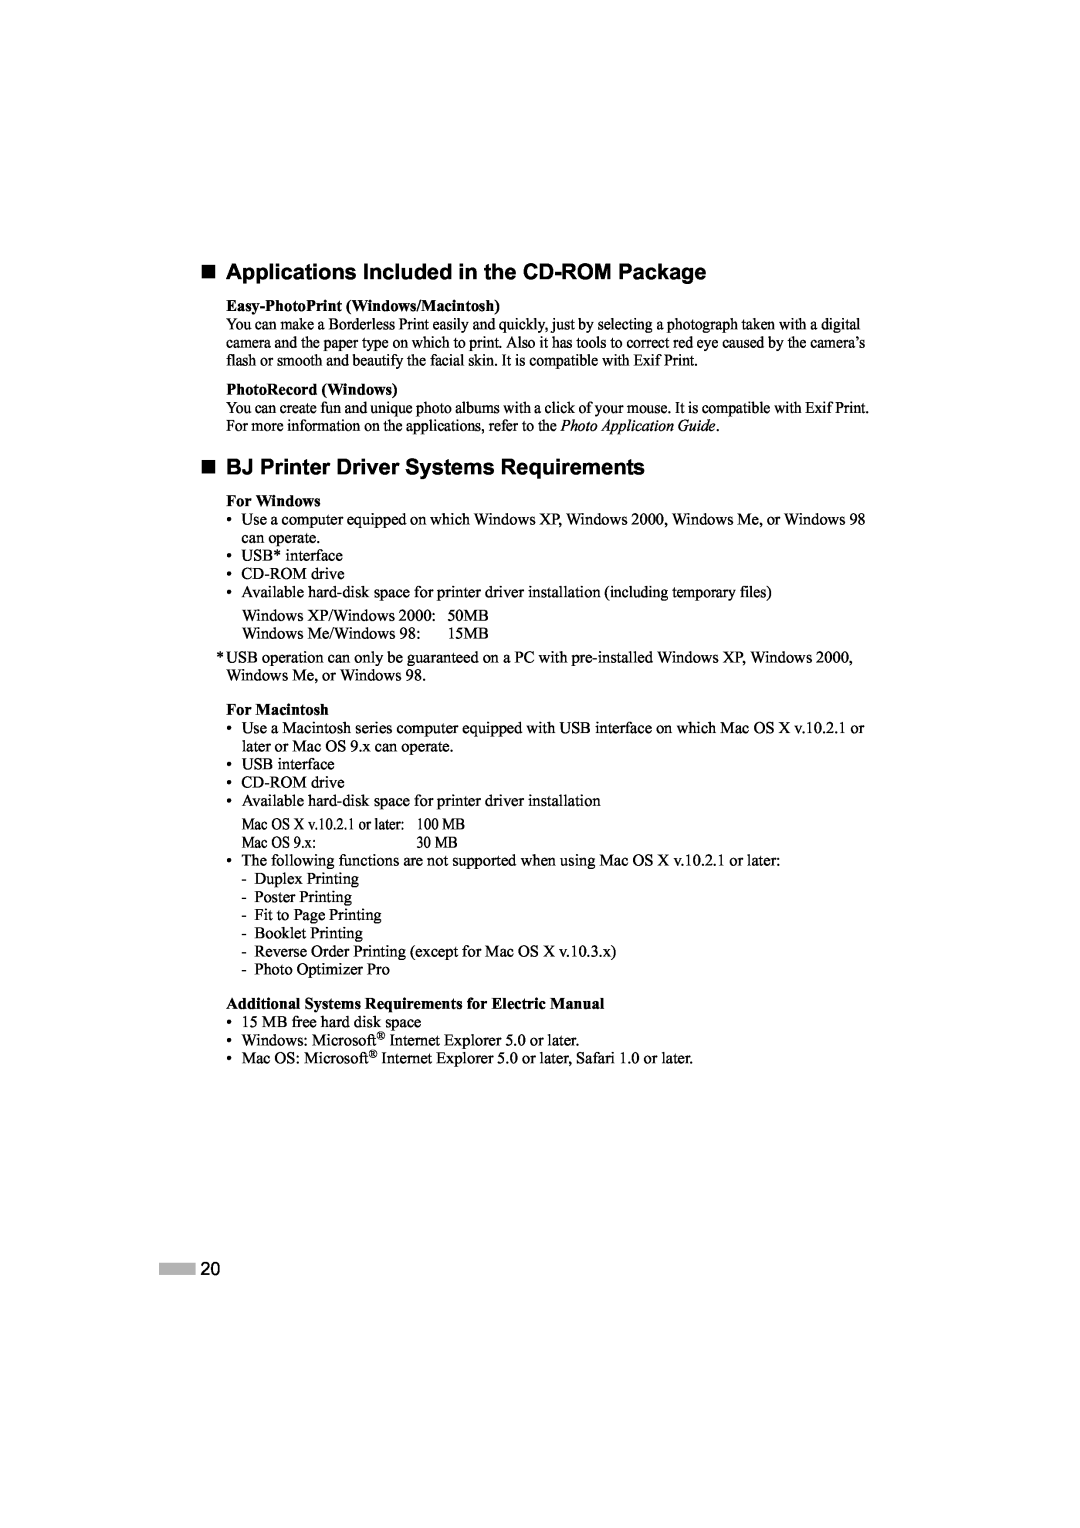 Canon IP1000 „ Applications Included in the CD-ROM Package, „ BJ Printer Driver Systems Requirements, PhotoRecord Windows 